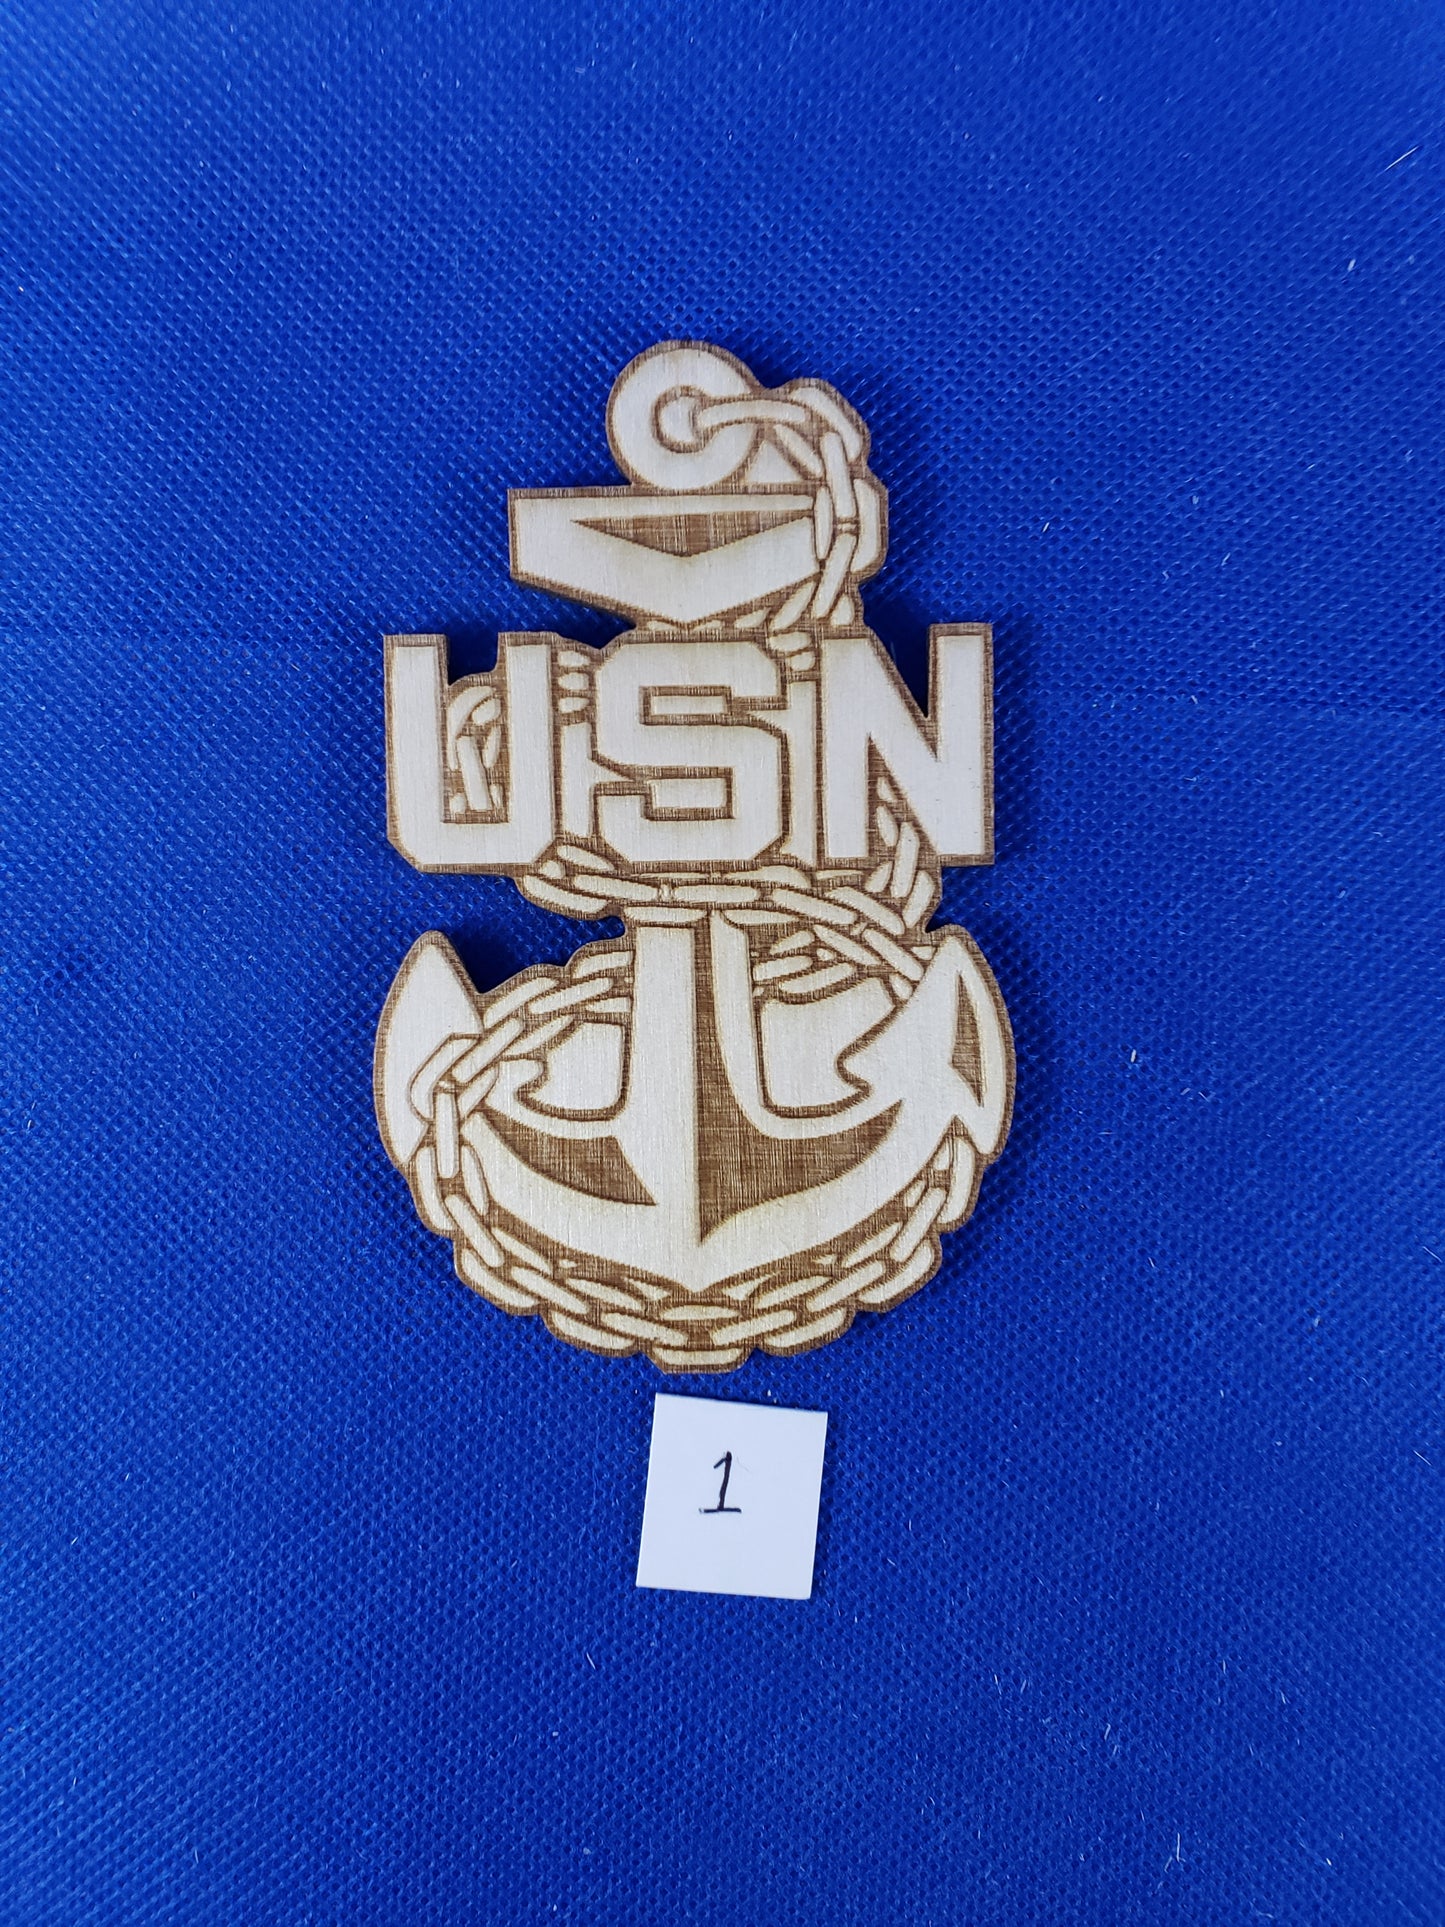 US Navy Chief Anchor - Laser cut natural wooden blanks